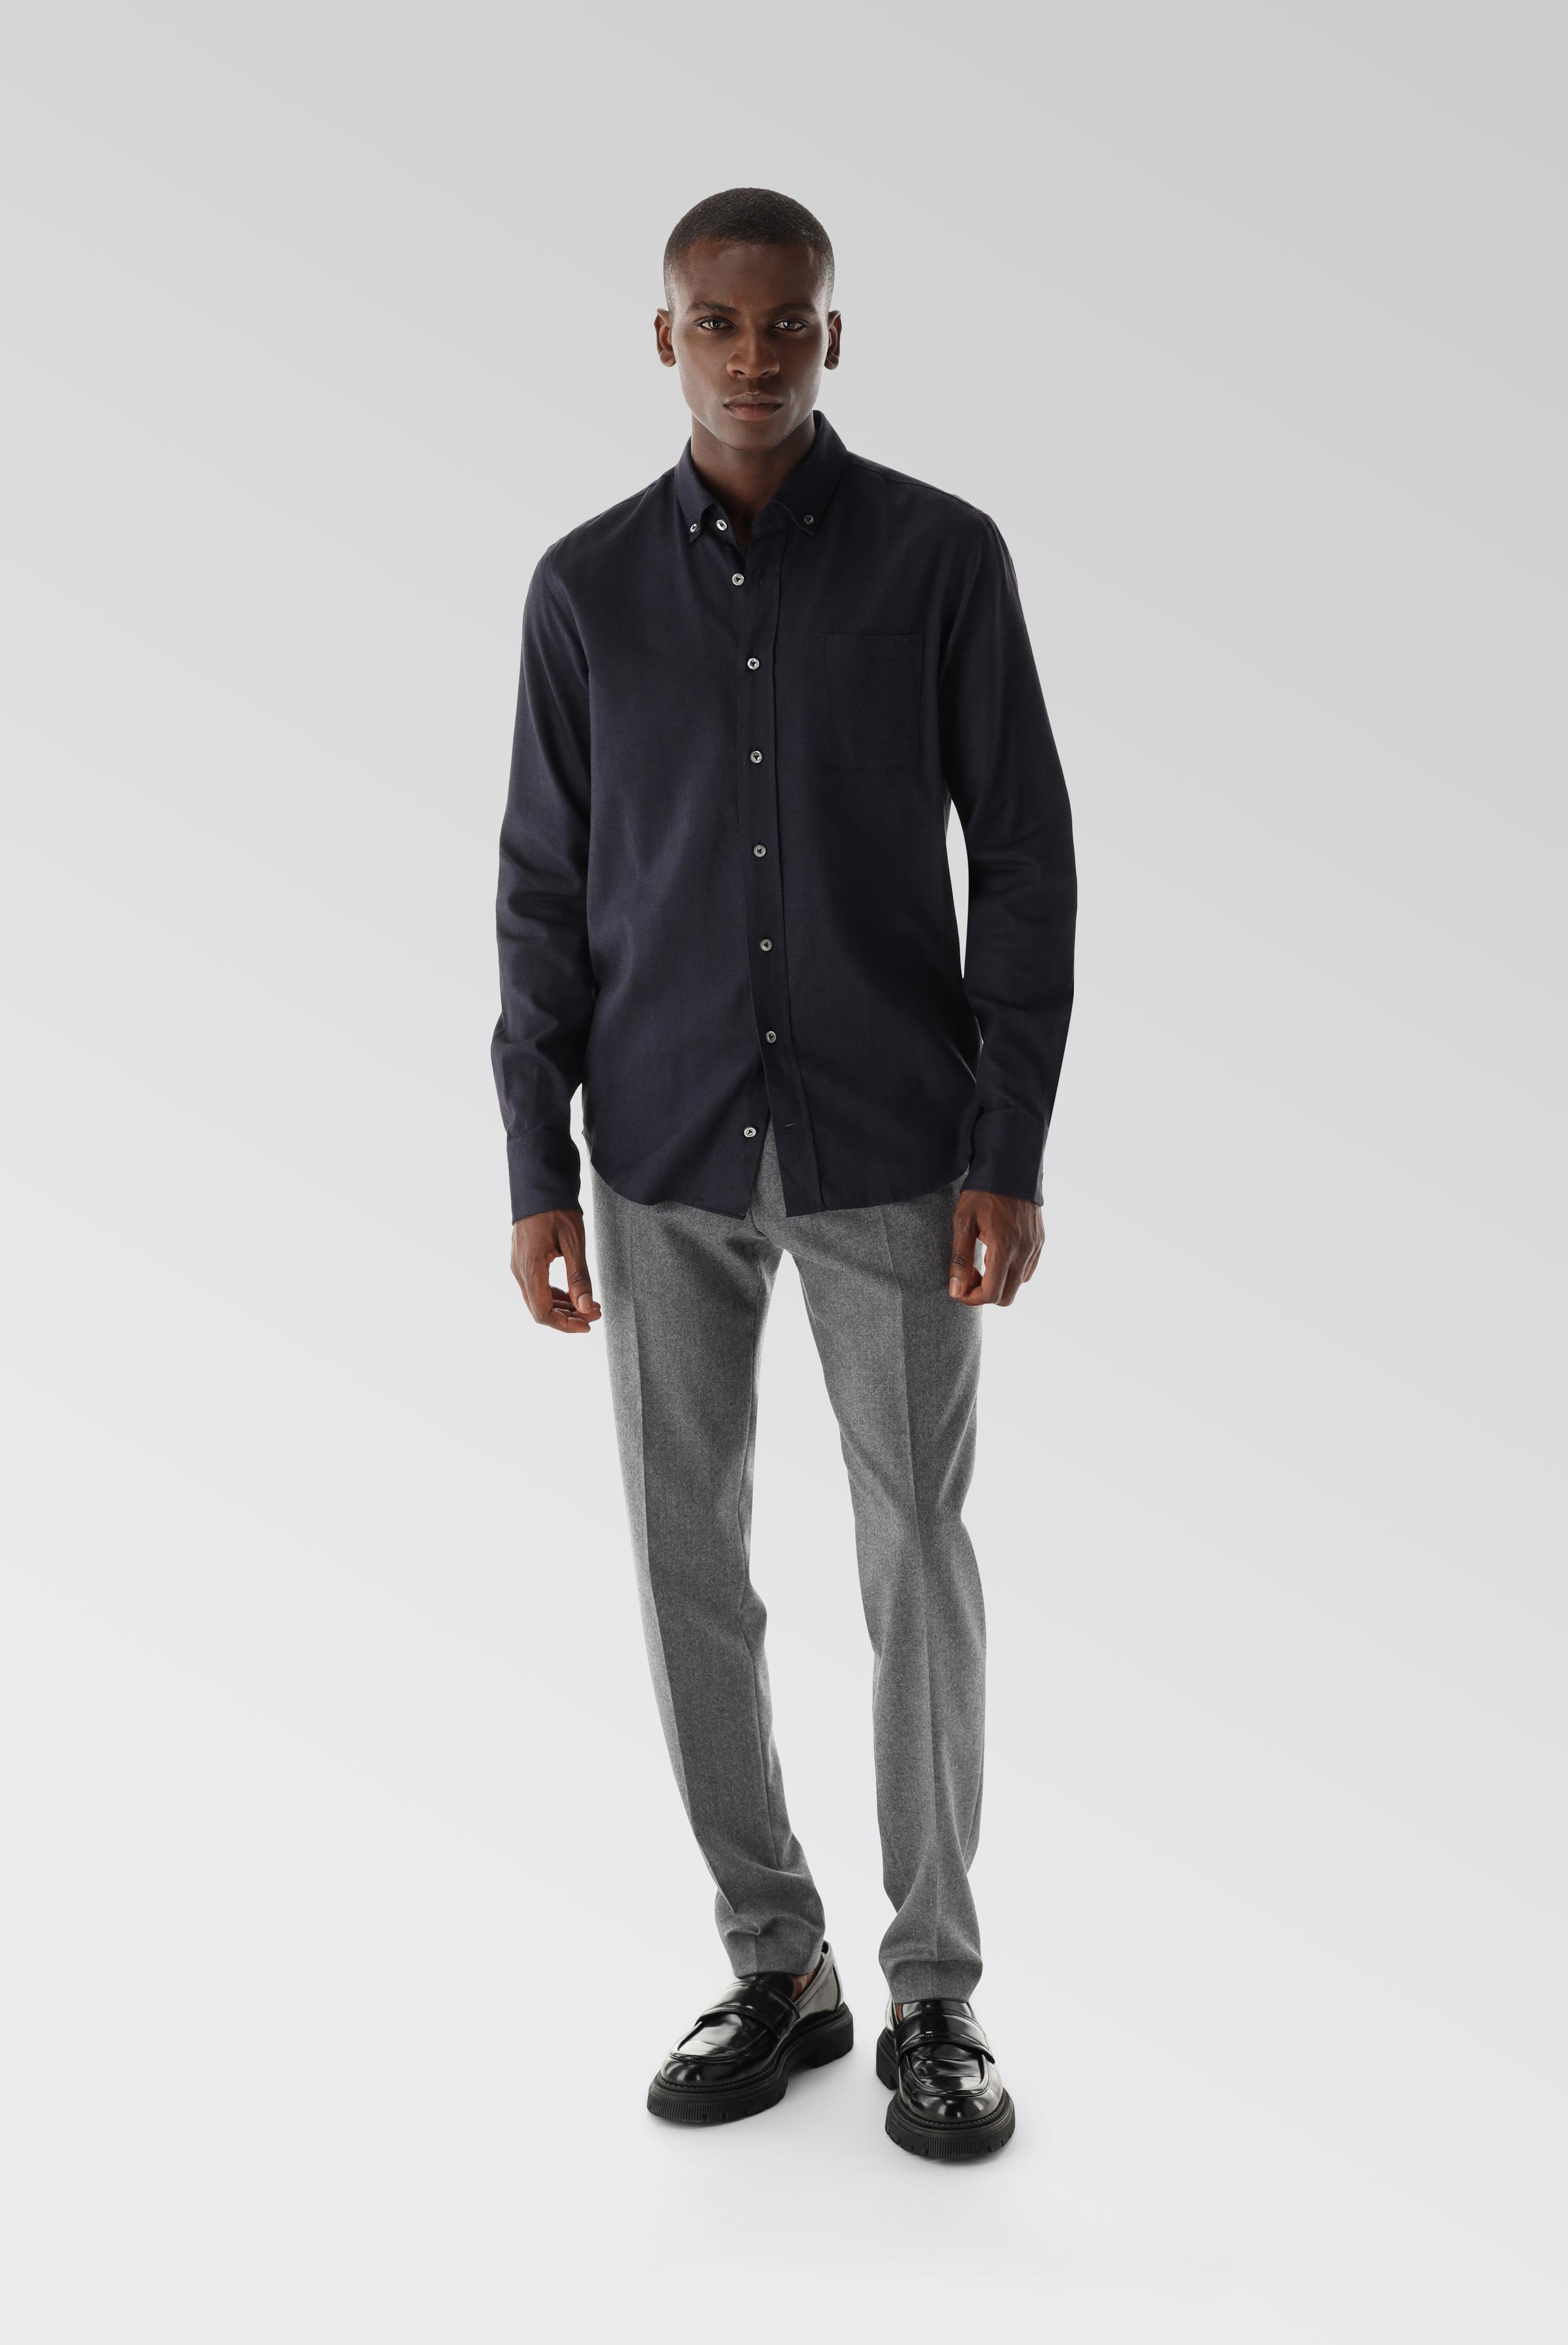 Casual Hemden+Button-Down Flanellhemd Tailor Fit+20.2013.9V.155045.790.40